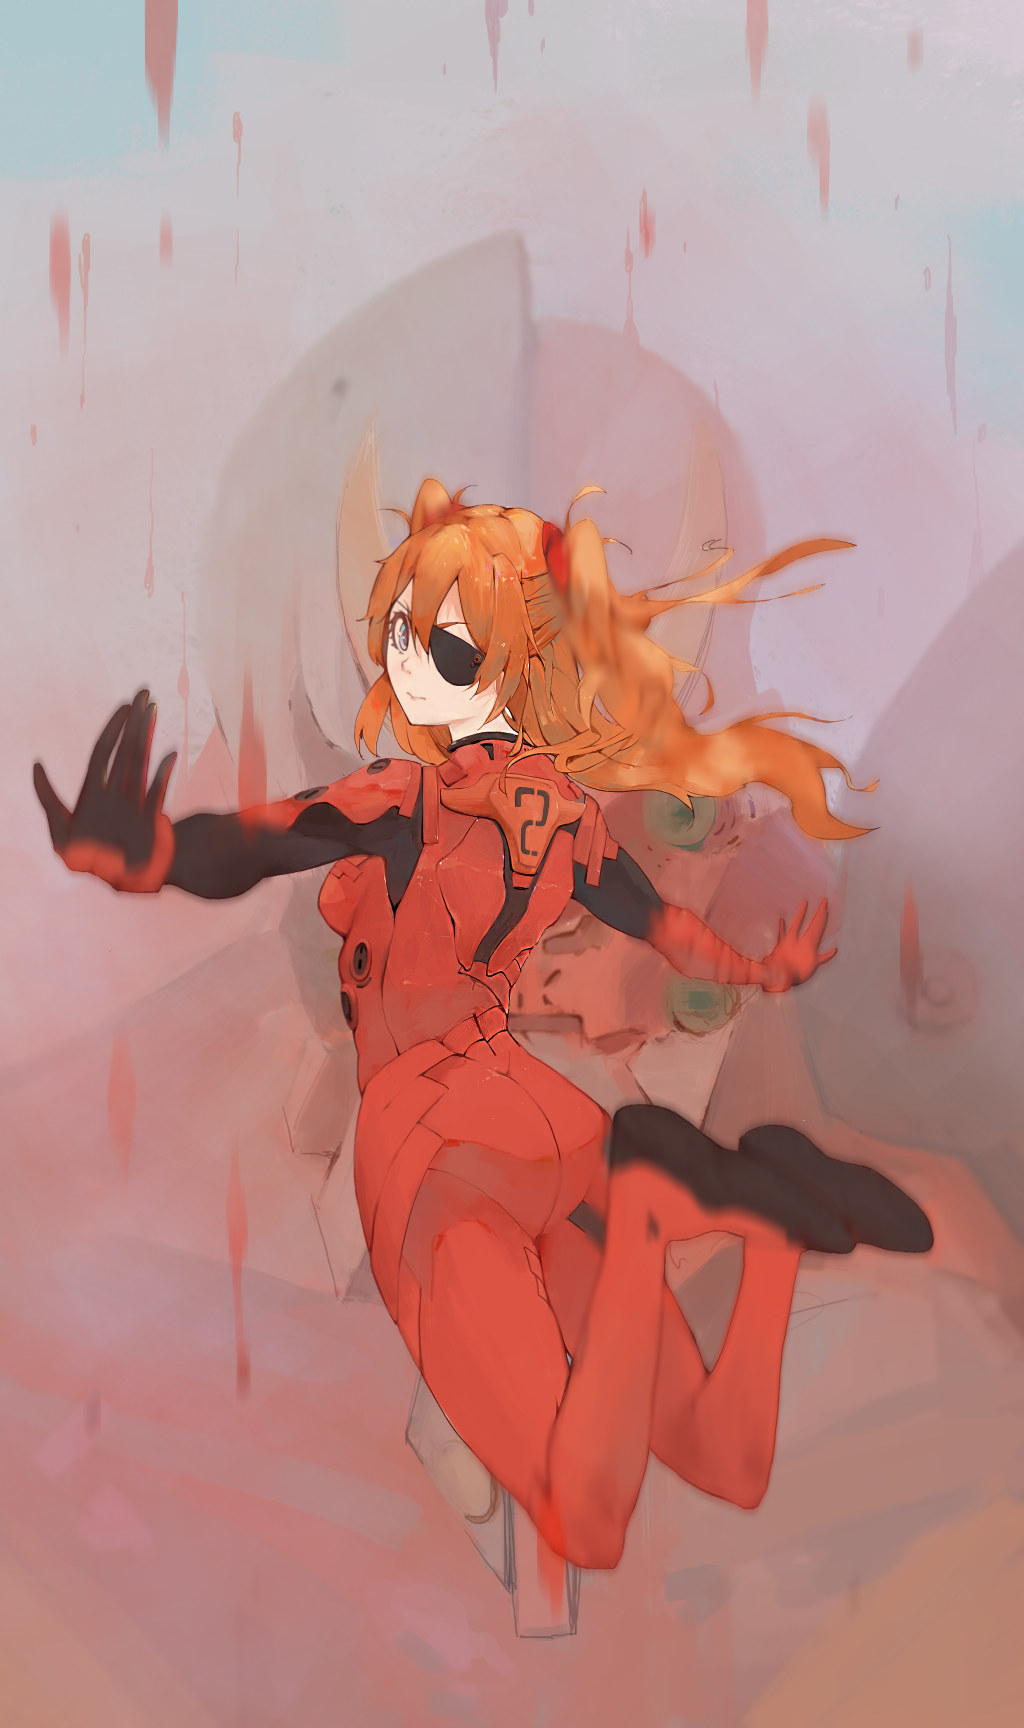 Anime 1024x1728 Neon Genesis Evangelion Rebuild of Evangelion Evangelion: 3.0 You Can (Not) Redo anime girls fan art 2D portrait display plugsuit long hair redhead looking at viewer thigh-highs jumping twintails ass Asuka Langley Soryu small boobs EVA Unit 02 blood rain blue eyes eyepatches bodysuit